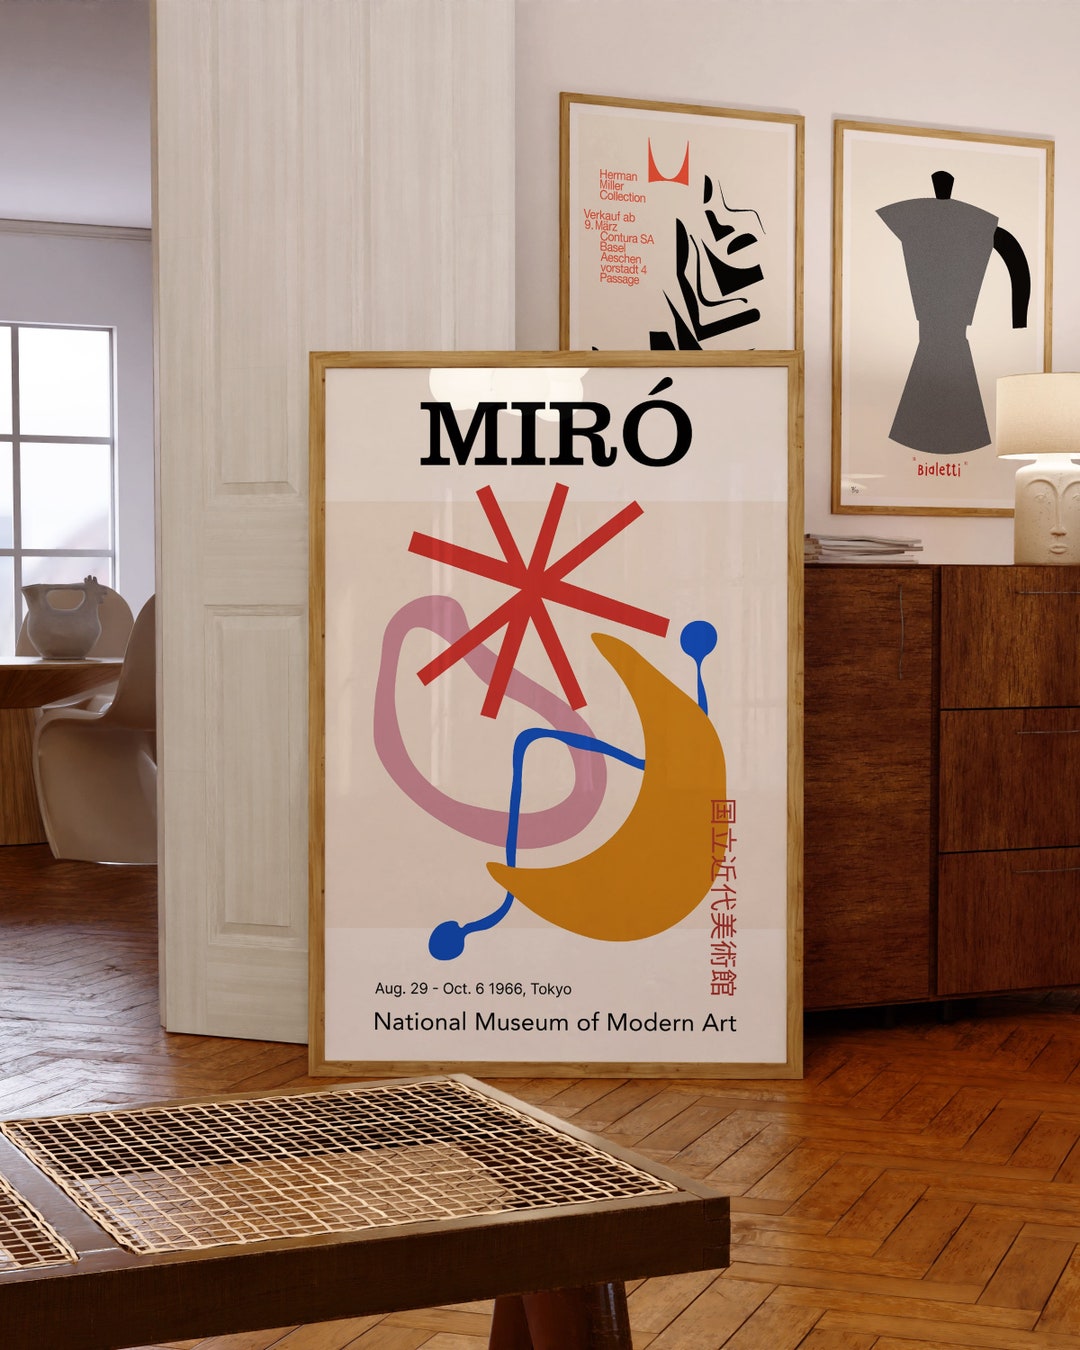 - Poster Tokyo, Exhibition Etsy of Museum Miró National Modern Art, Mid-century Poster Joan 1966 Modern